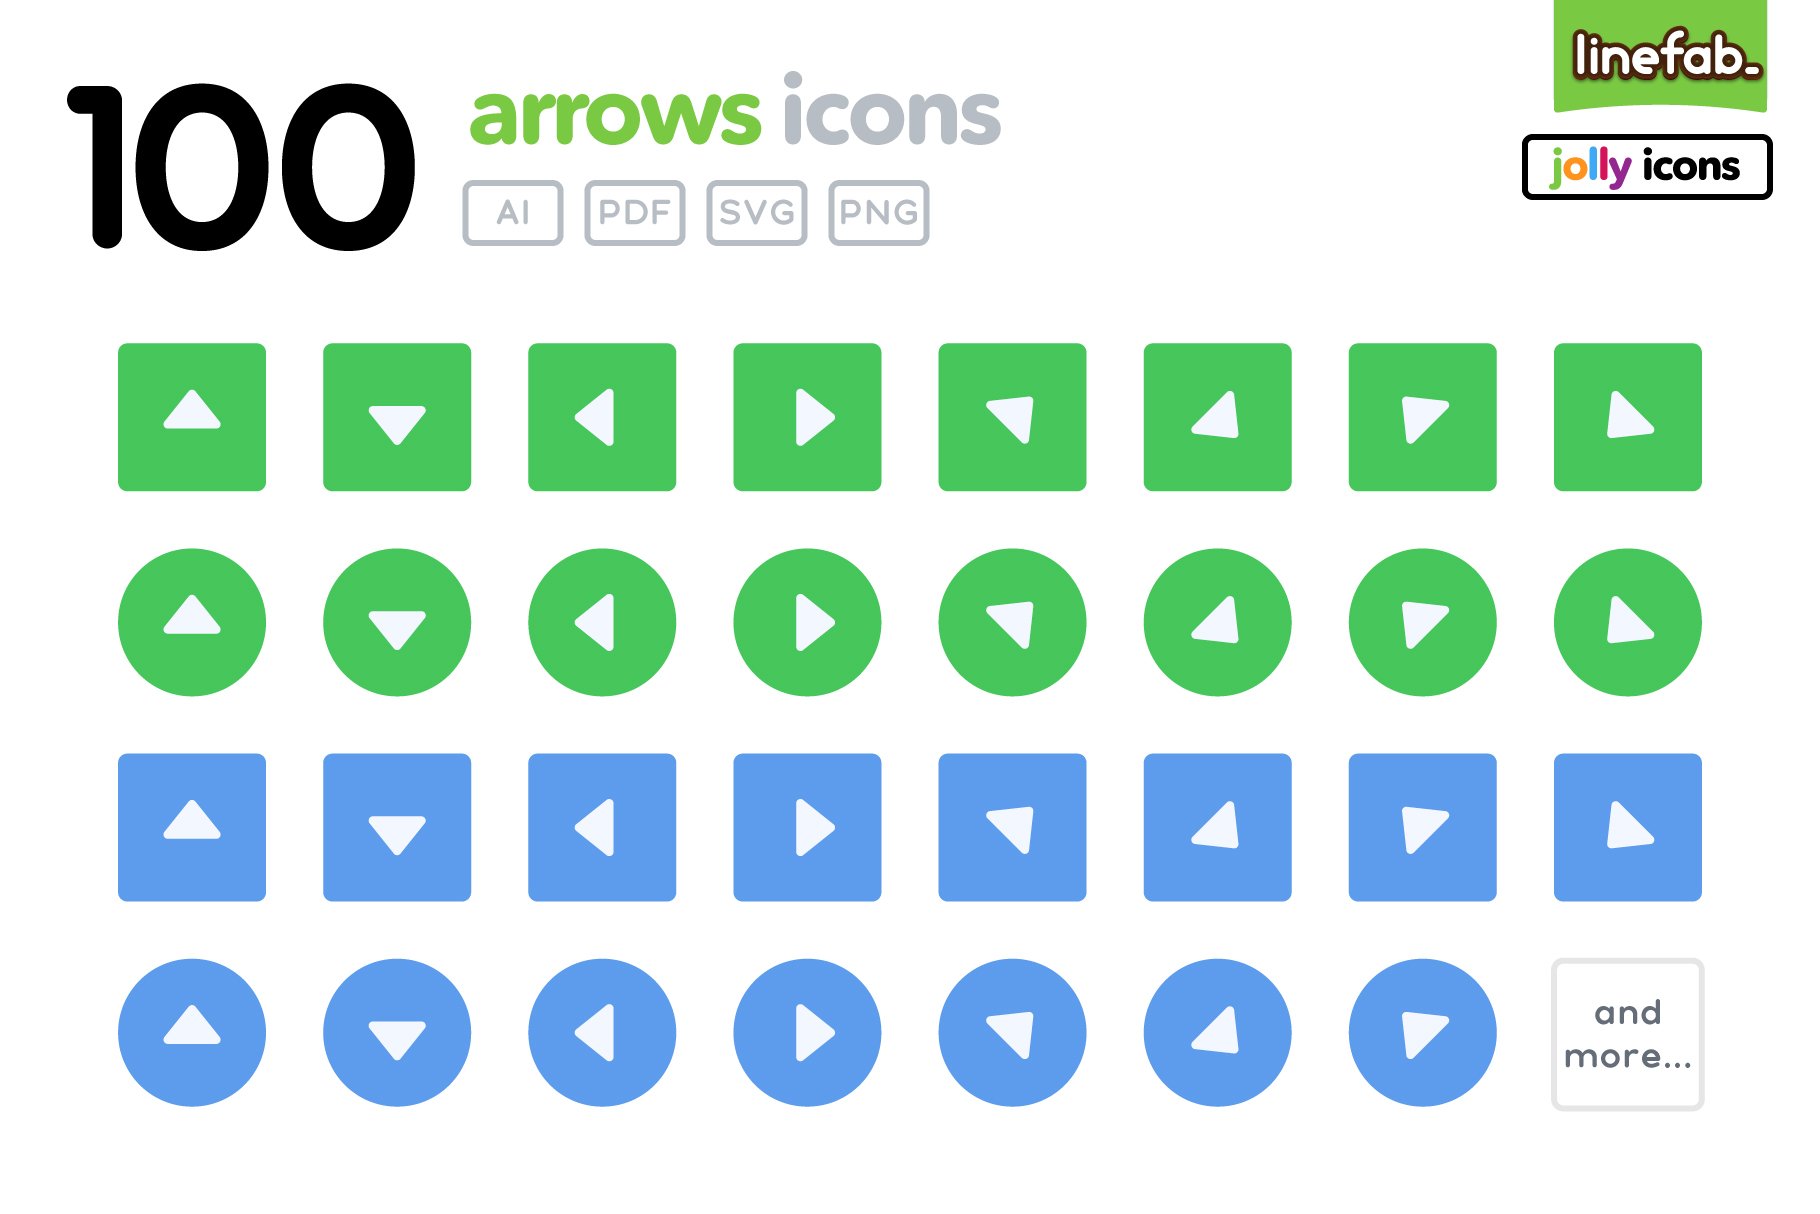 100 Arrows Icons - 5 - Jolly cover image.